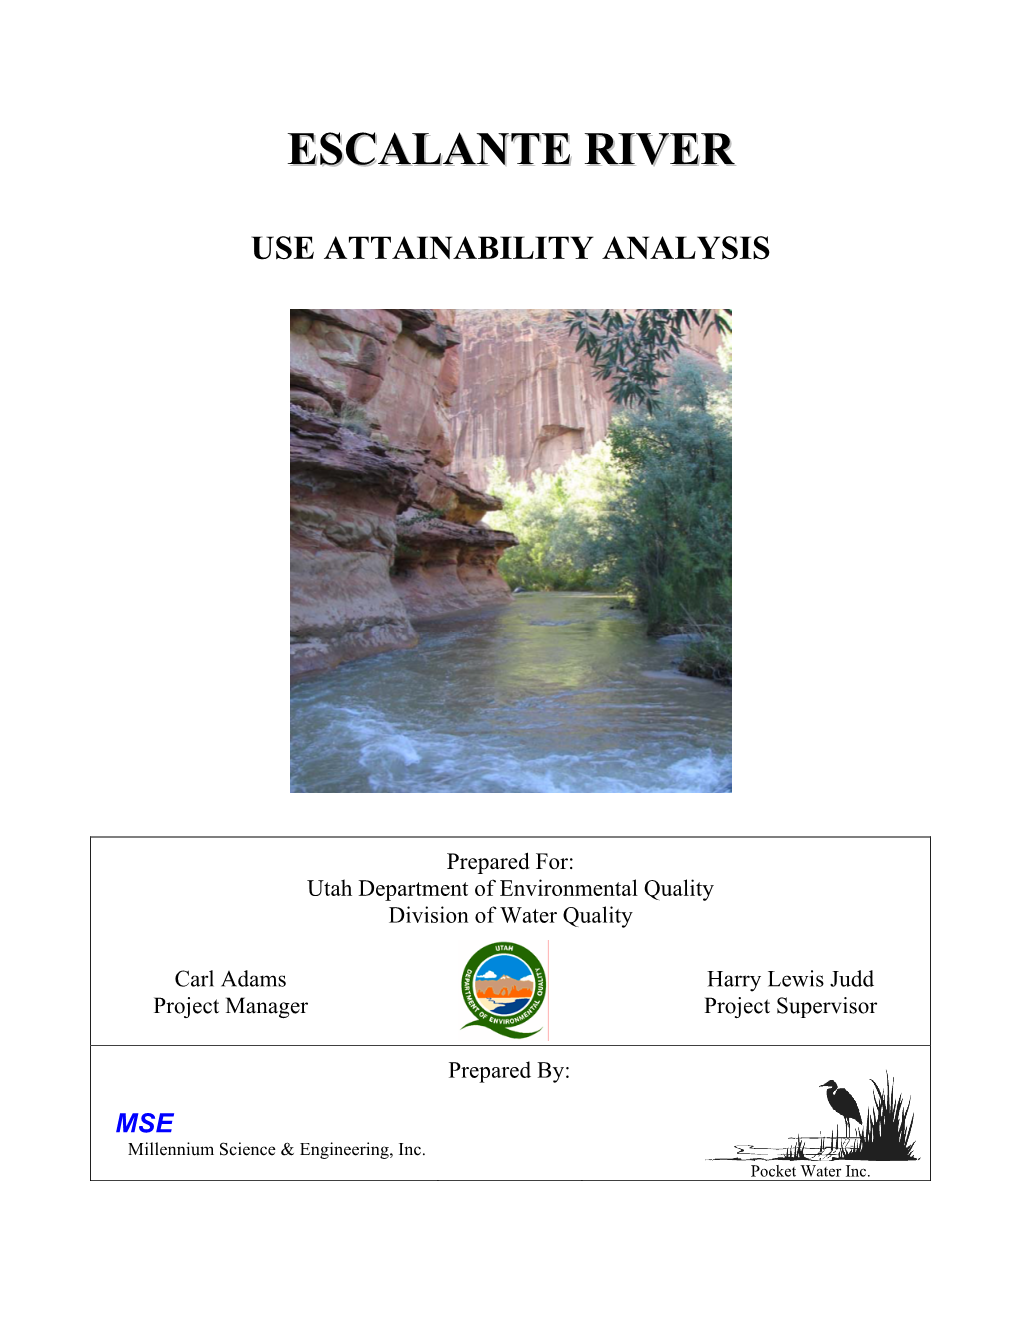 Escalante River Watershed Use Attainability Analysis